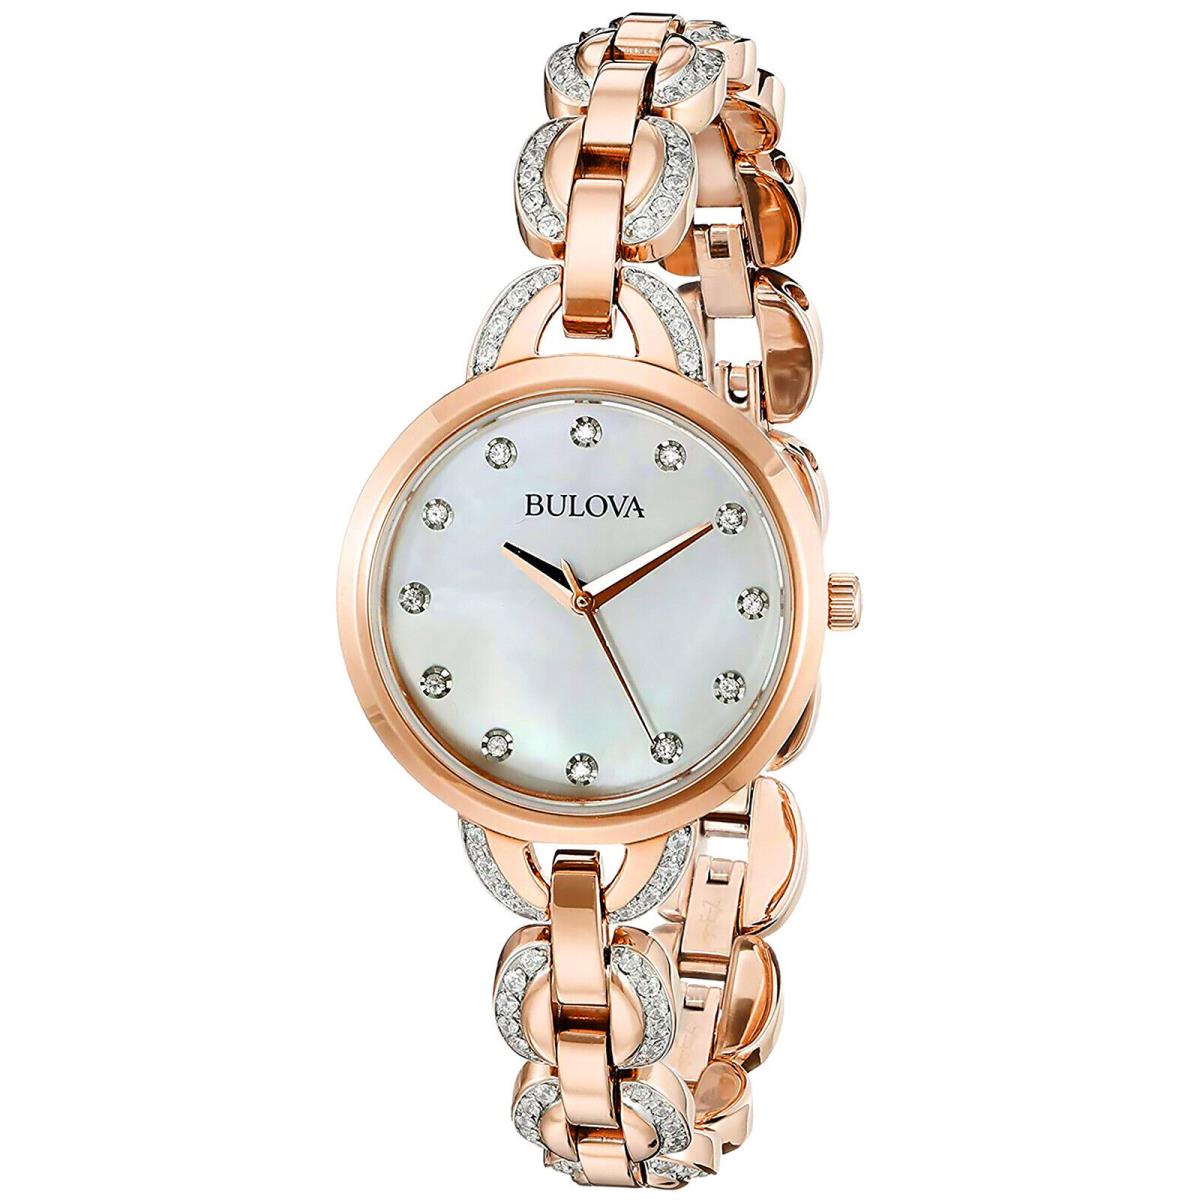 Bulova Womens Dress Watch Rose Gold Band White Mother of Pearl Dial Crystals - White Dial, Rose Gold Band, Pink Bezel